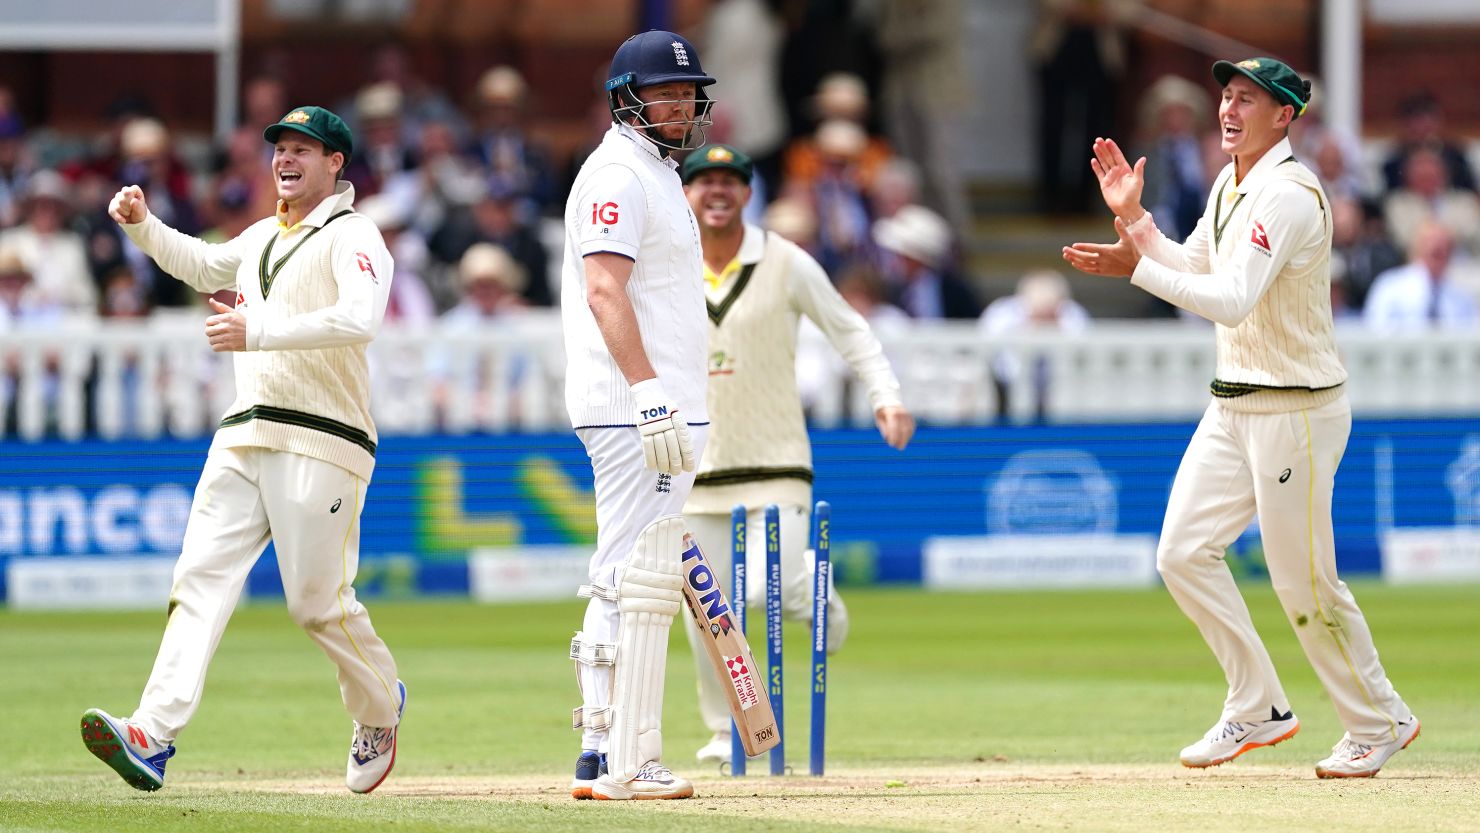 England's Jonny Bairstow (centre) looks frustrated after being run out by Australia's Alex Carey (not pictured) as players celebrate during day five of the second Ashes test match at Lord's, London. Picture date: Sunday July 2, 2023.